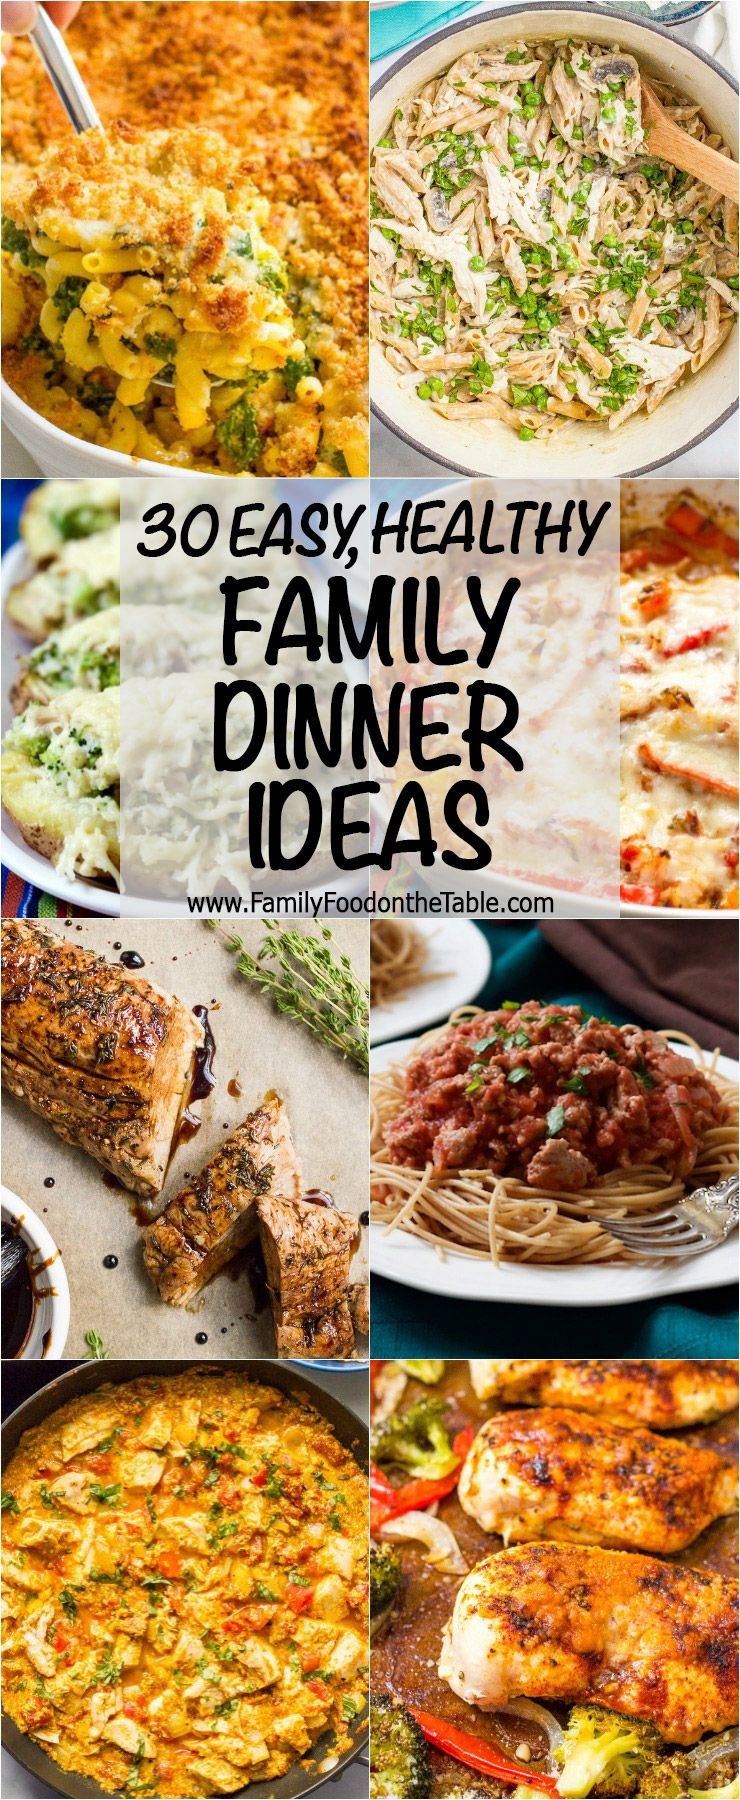 Quick And Easy Dinner Recipes For Families
 30 easy healthy family dinner ideas